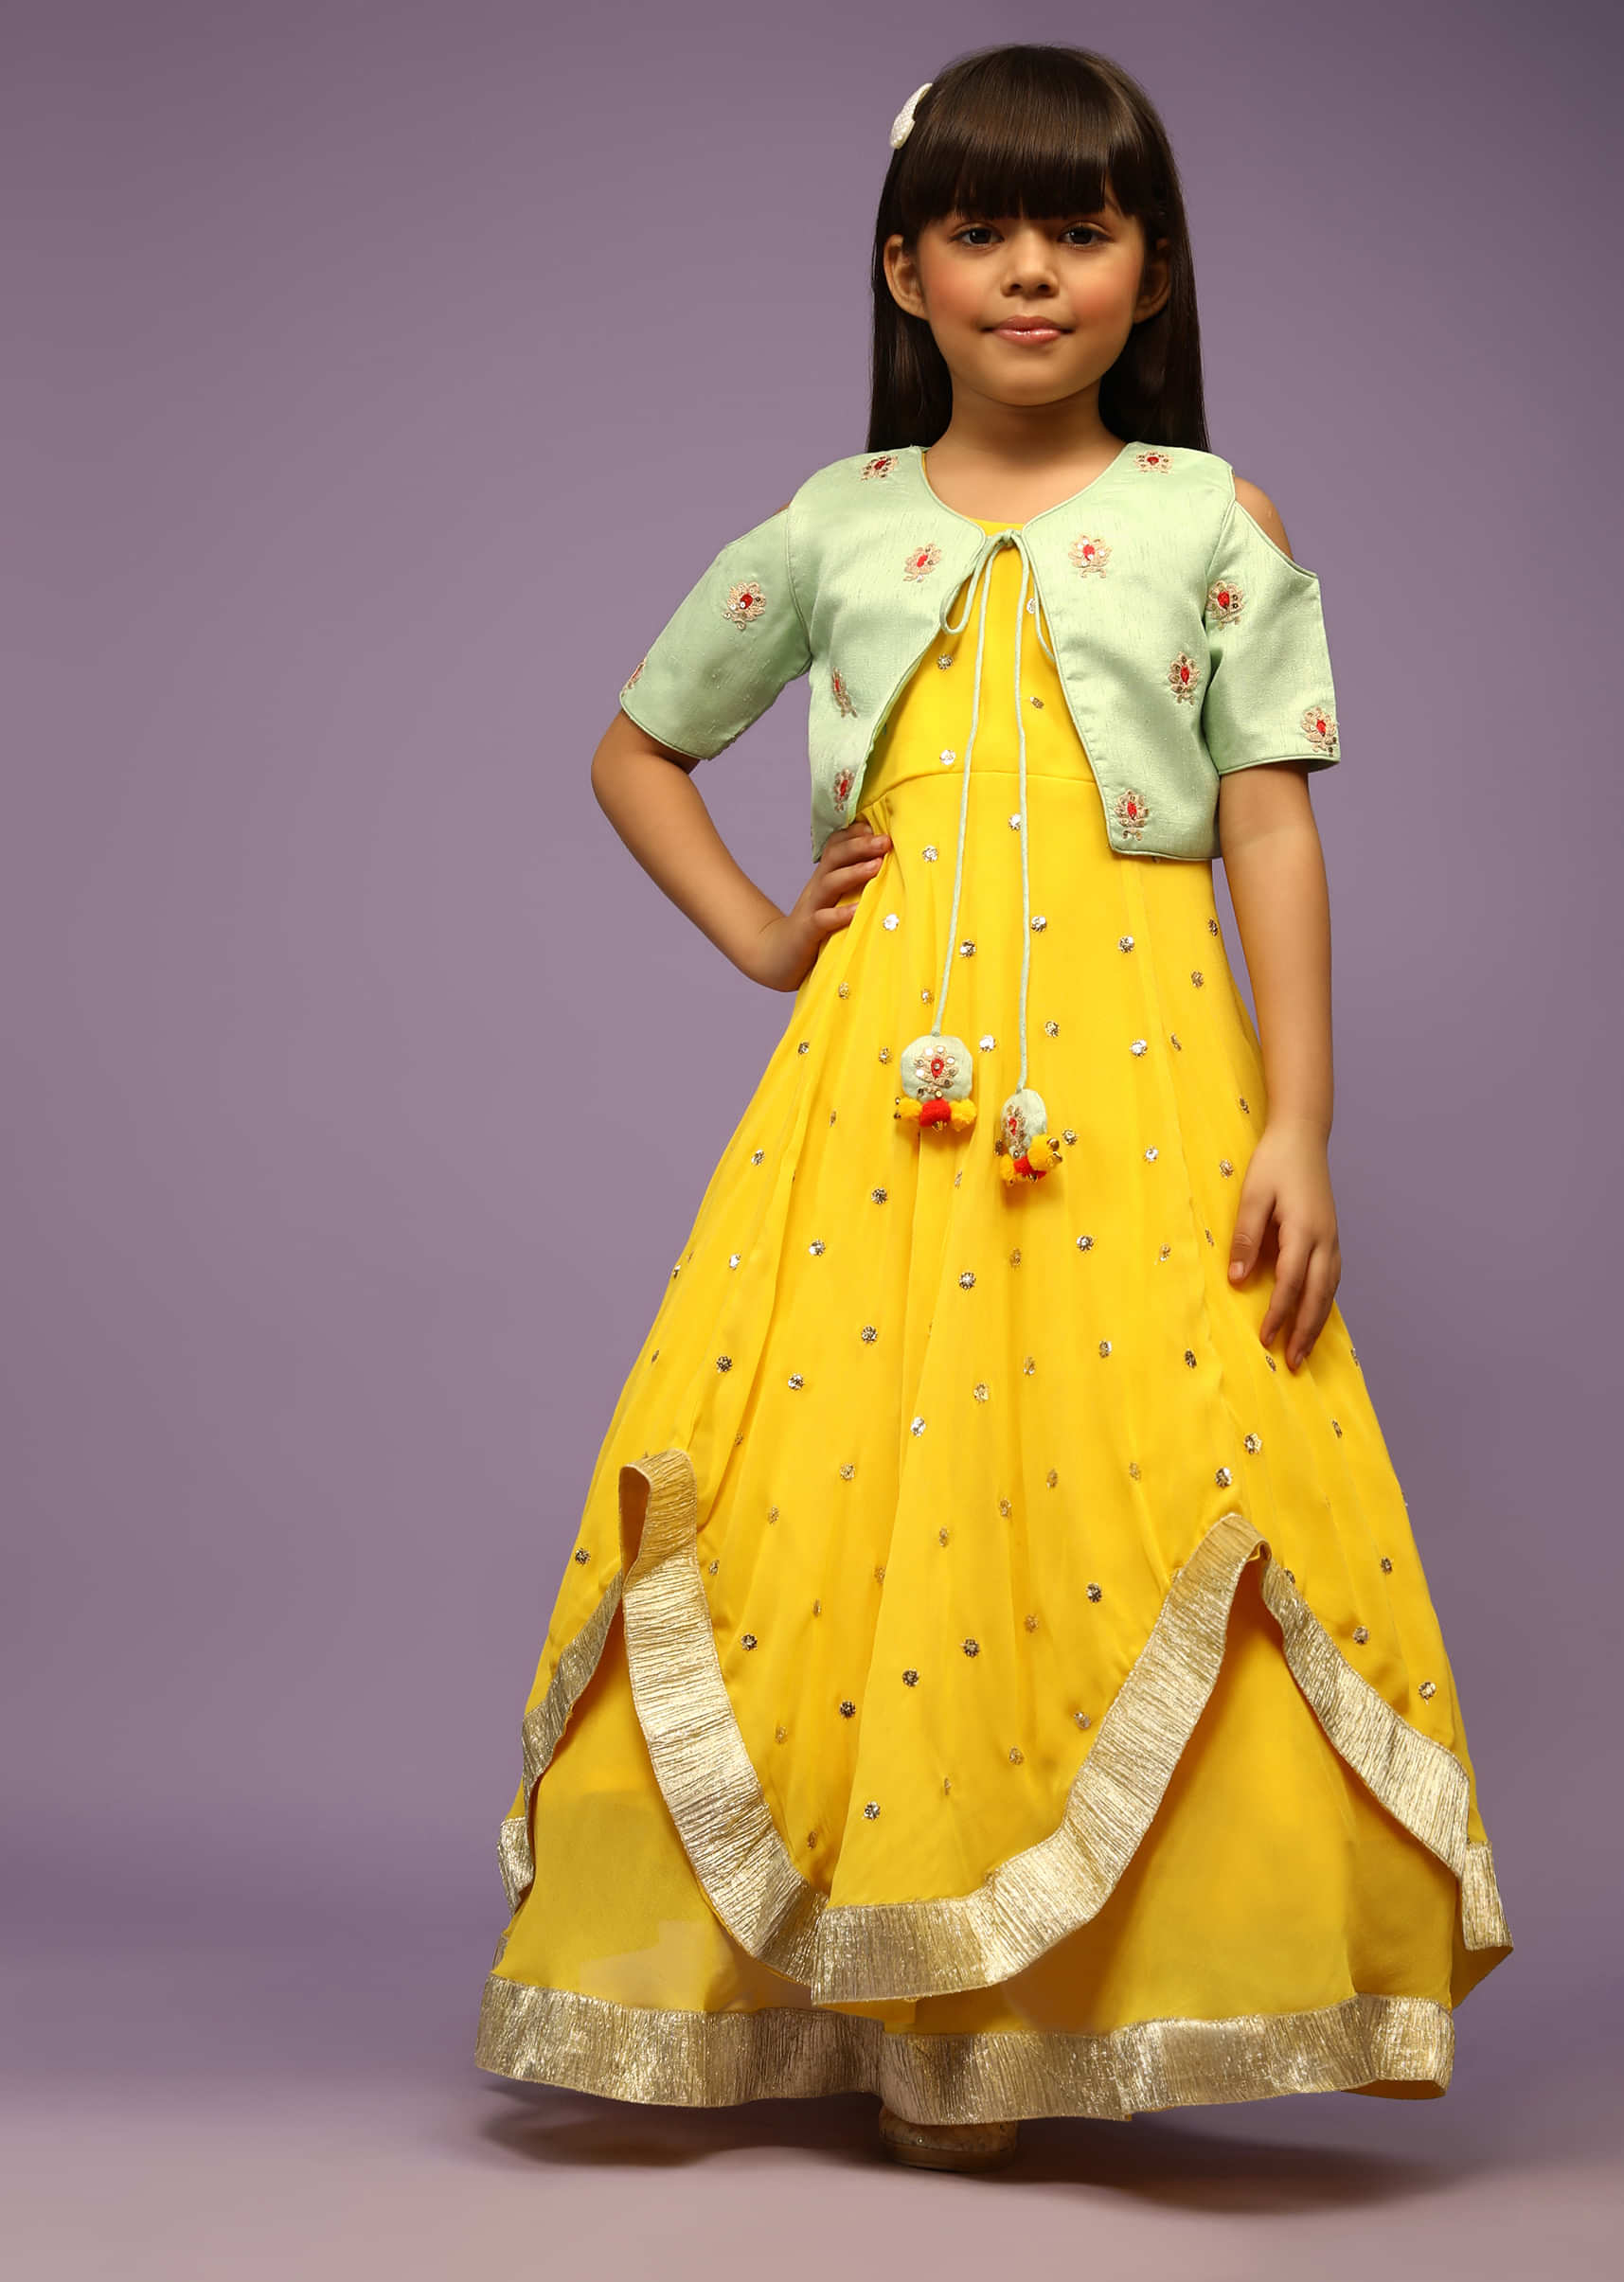 Kalki Girls Yellow Anarkali Suit In Georgette With High-low Layers And Pista Green Cold Shoulder Jacket By Fayon Kids